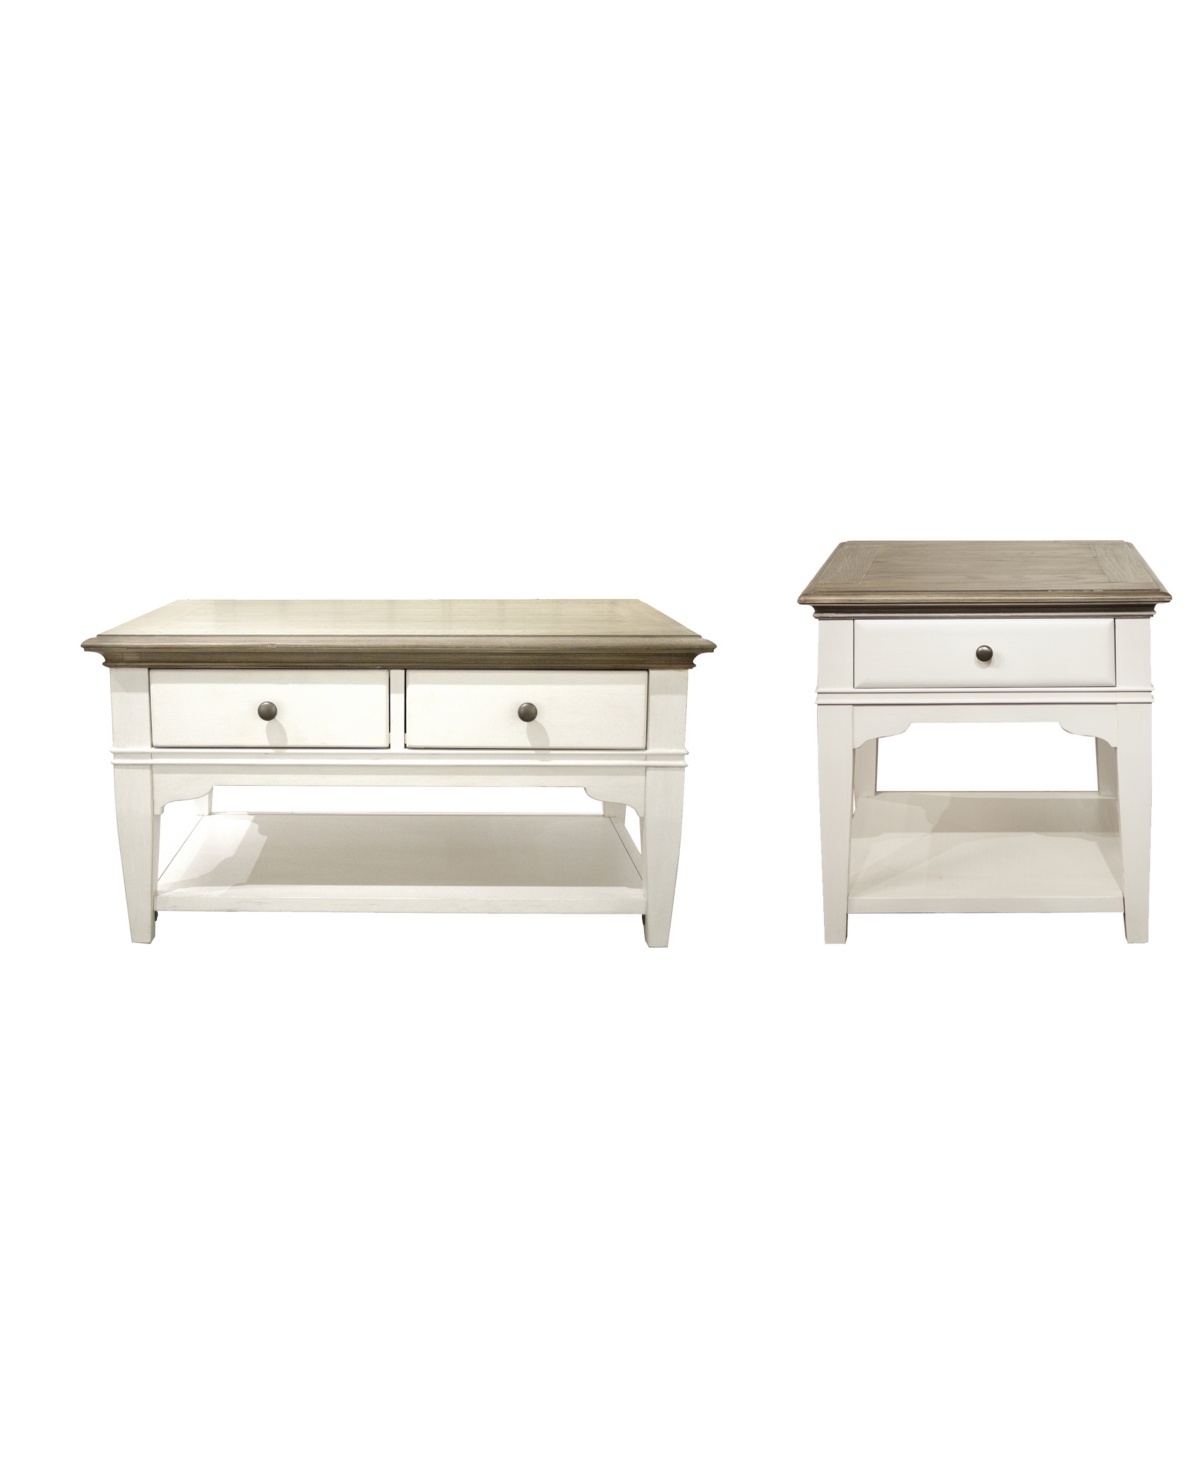 Shop Macy's Myra Small Leg Cocktail Table And Leg End Table Set In Natural,paperwhite